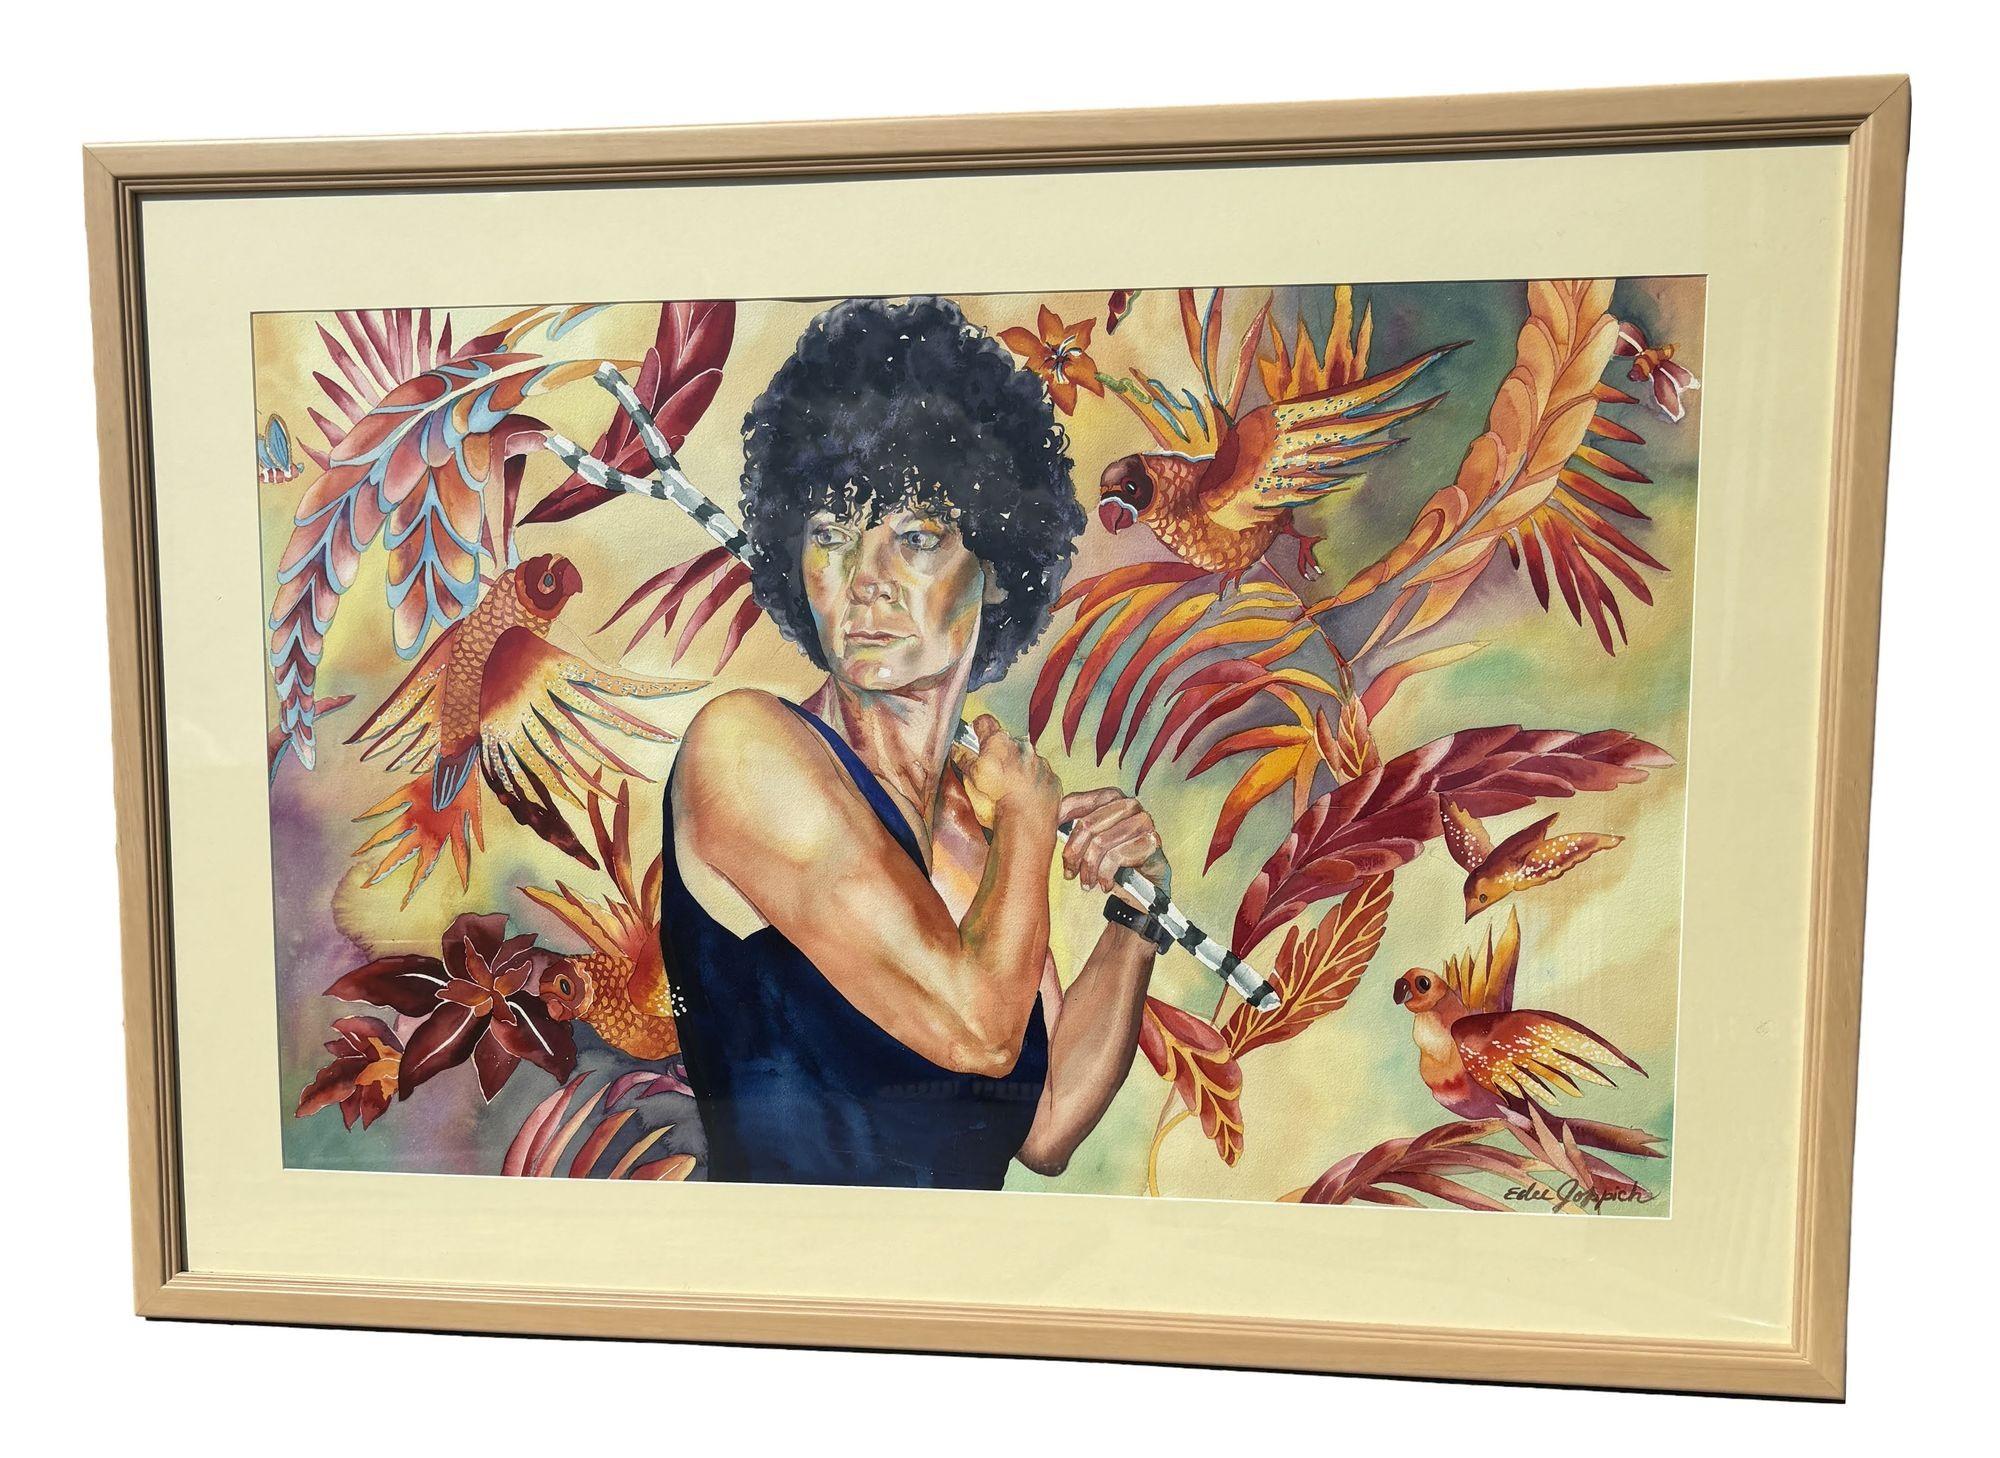 Oirignal watercolor portrait on paper signed by Edee Joppich featuring a woman in a leotard against a multicolor background with multicolored macaws surrounding her.

Comes in the original gallery frame.

Edee Joppich, a seasoned artist, earned her